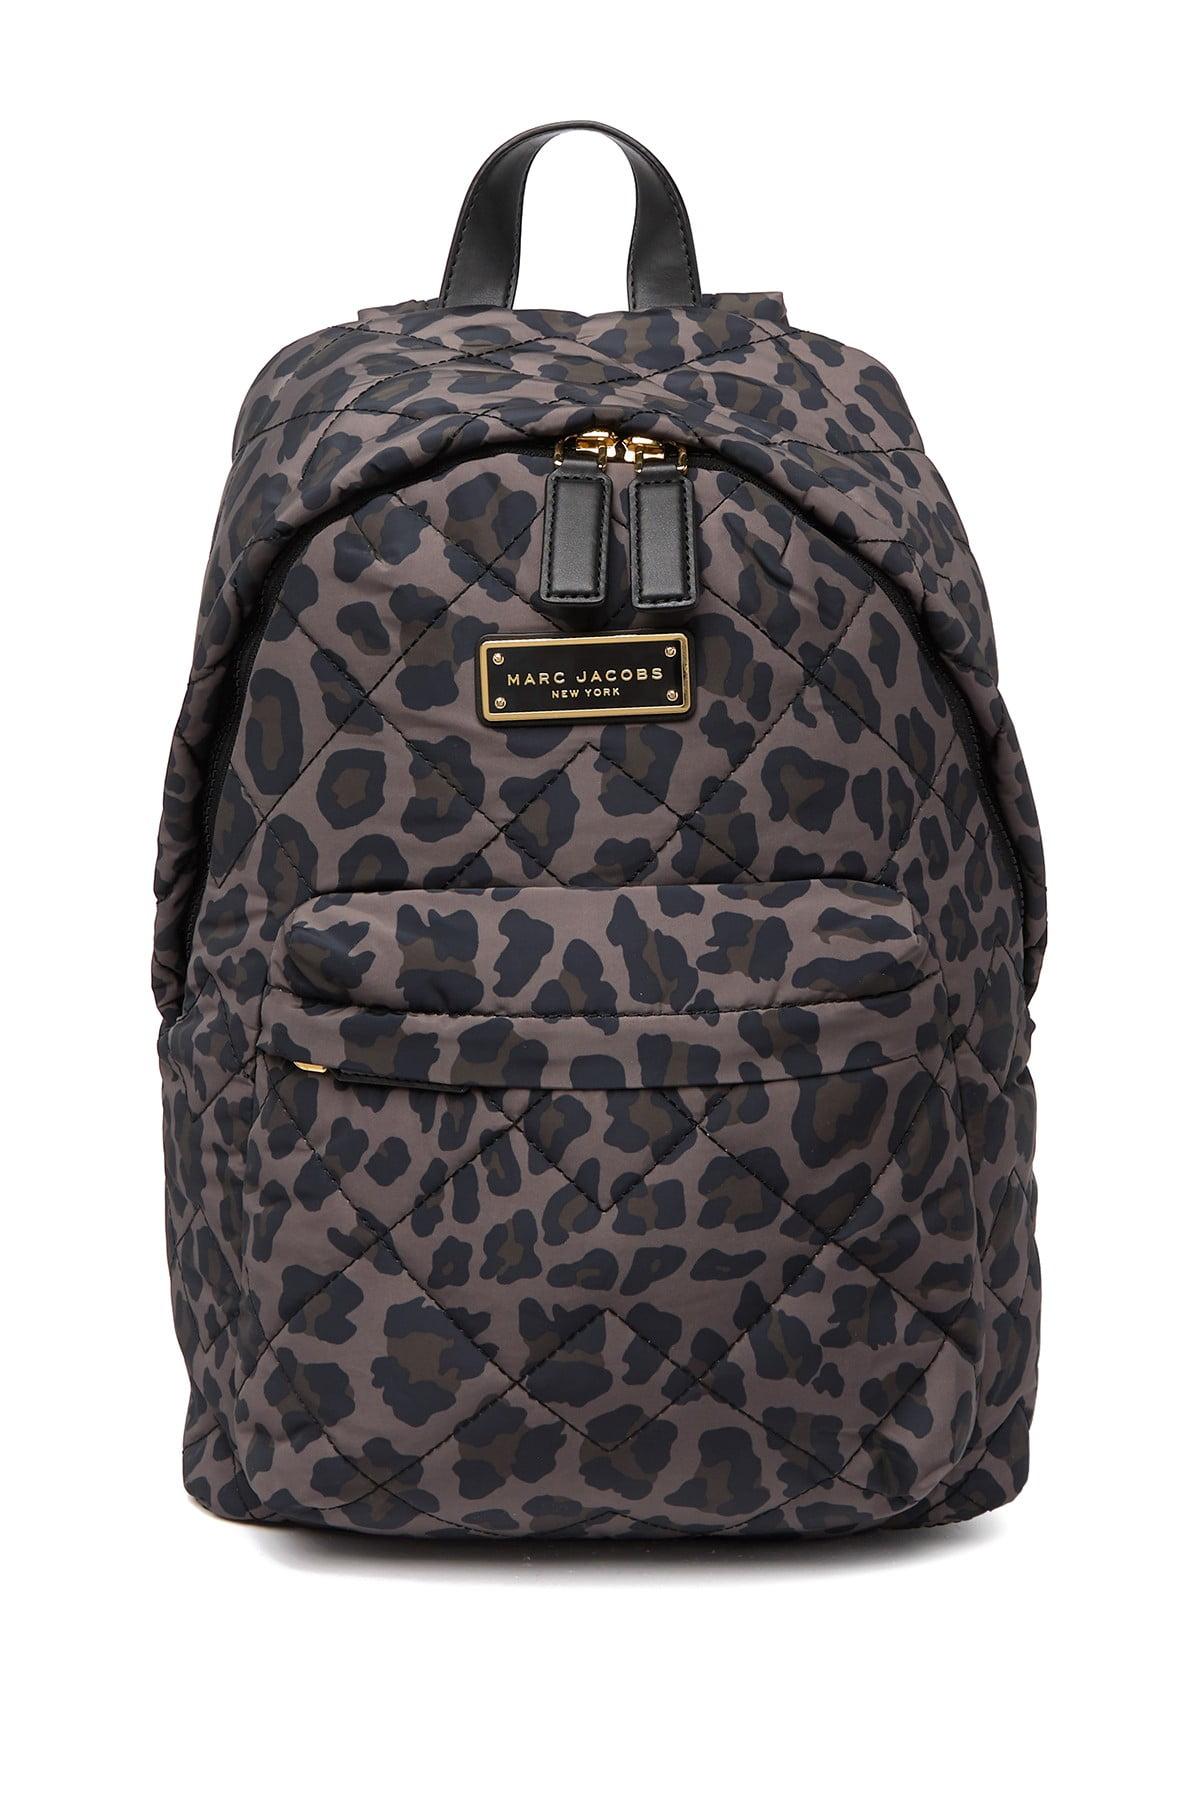 Marc Jacobs Synthetic Quilted Nylon Printed Backpack in Black - Lyst